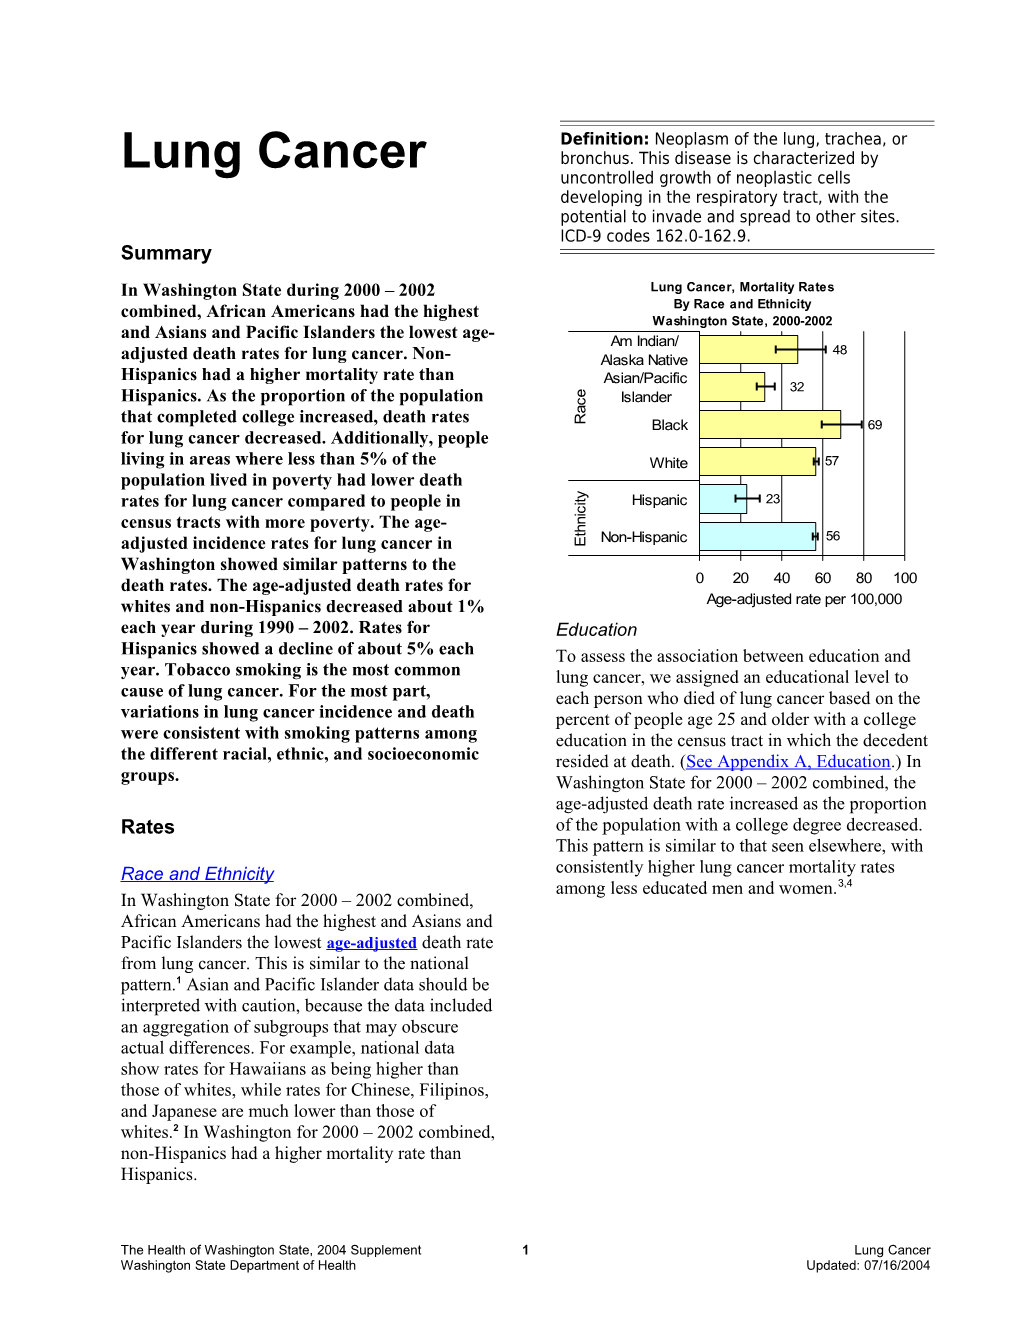 Health of Washington State - Lung Cancer - 2004